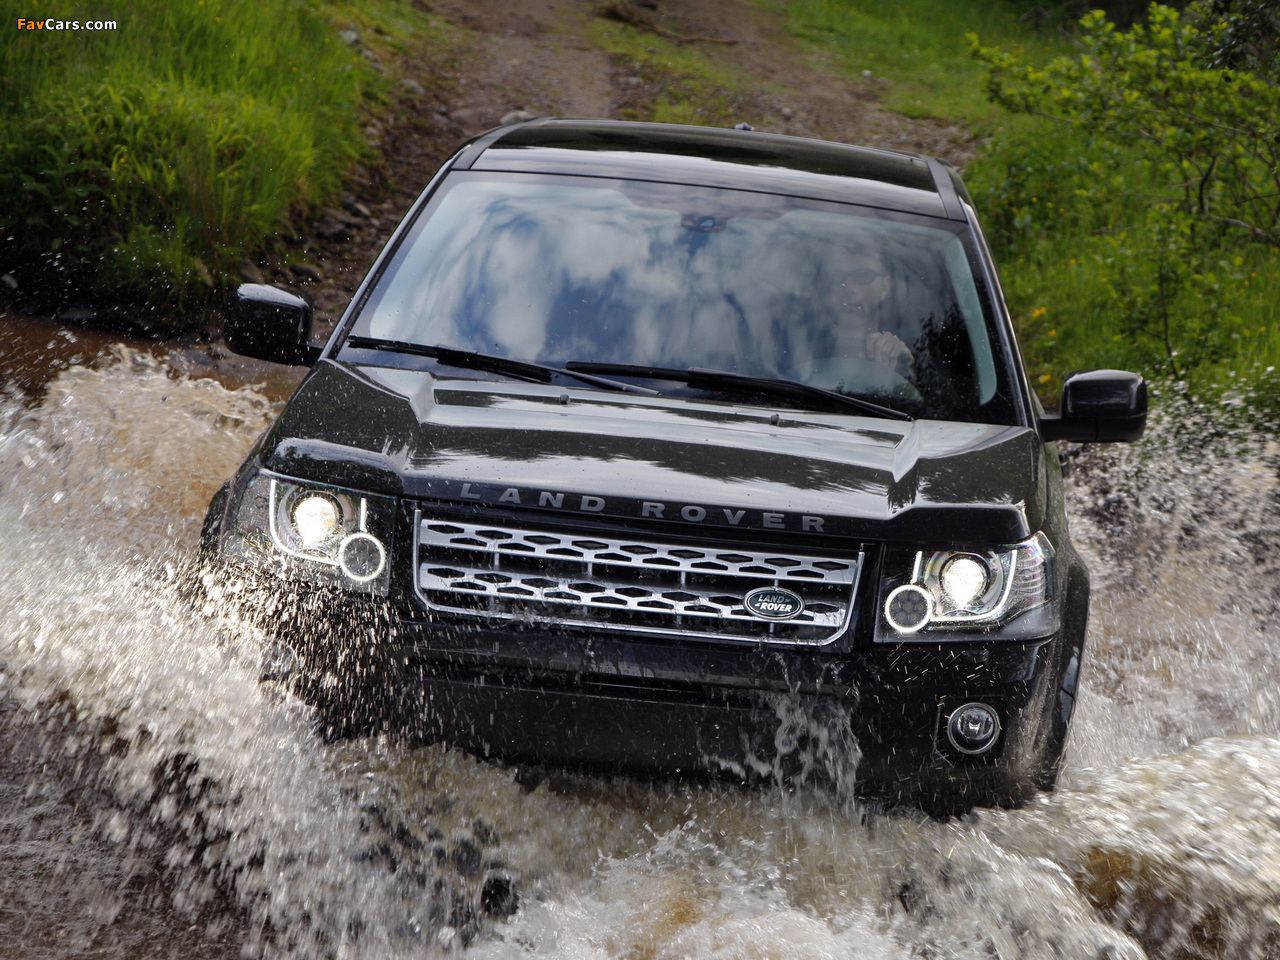 Land Rover Freelander 2 SD4 2012 pictures (1280 x 960)